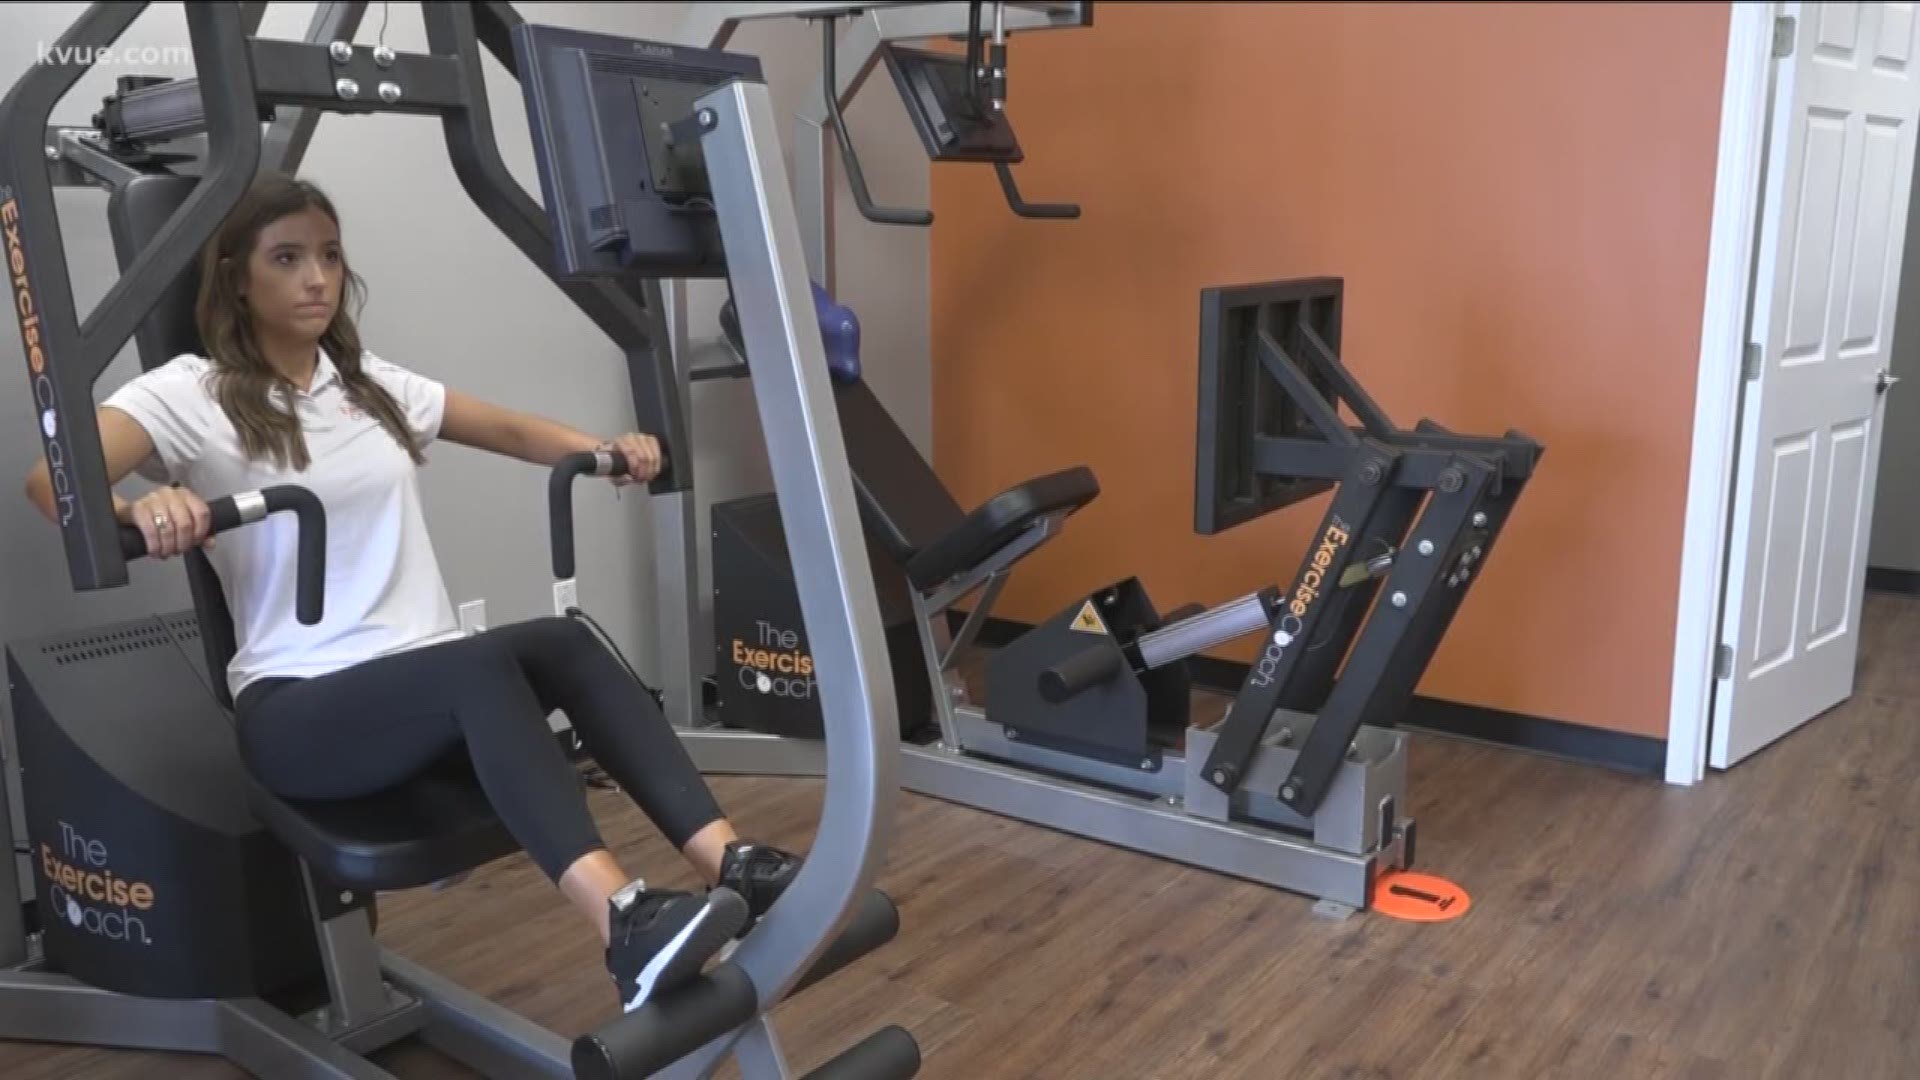 A Central Texas business is taking a tech-savvy approach to working out.